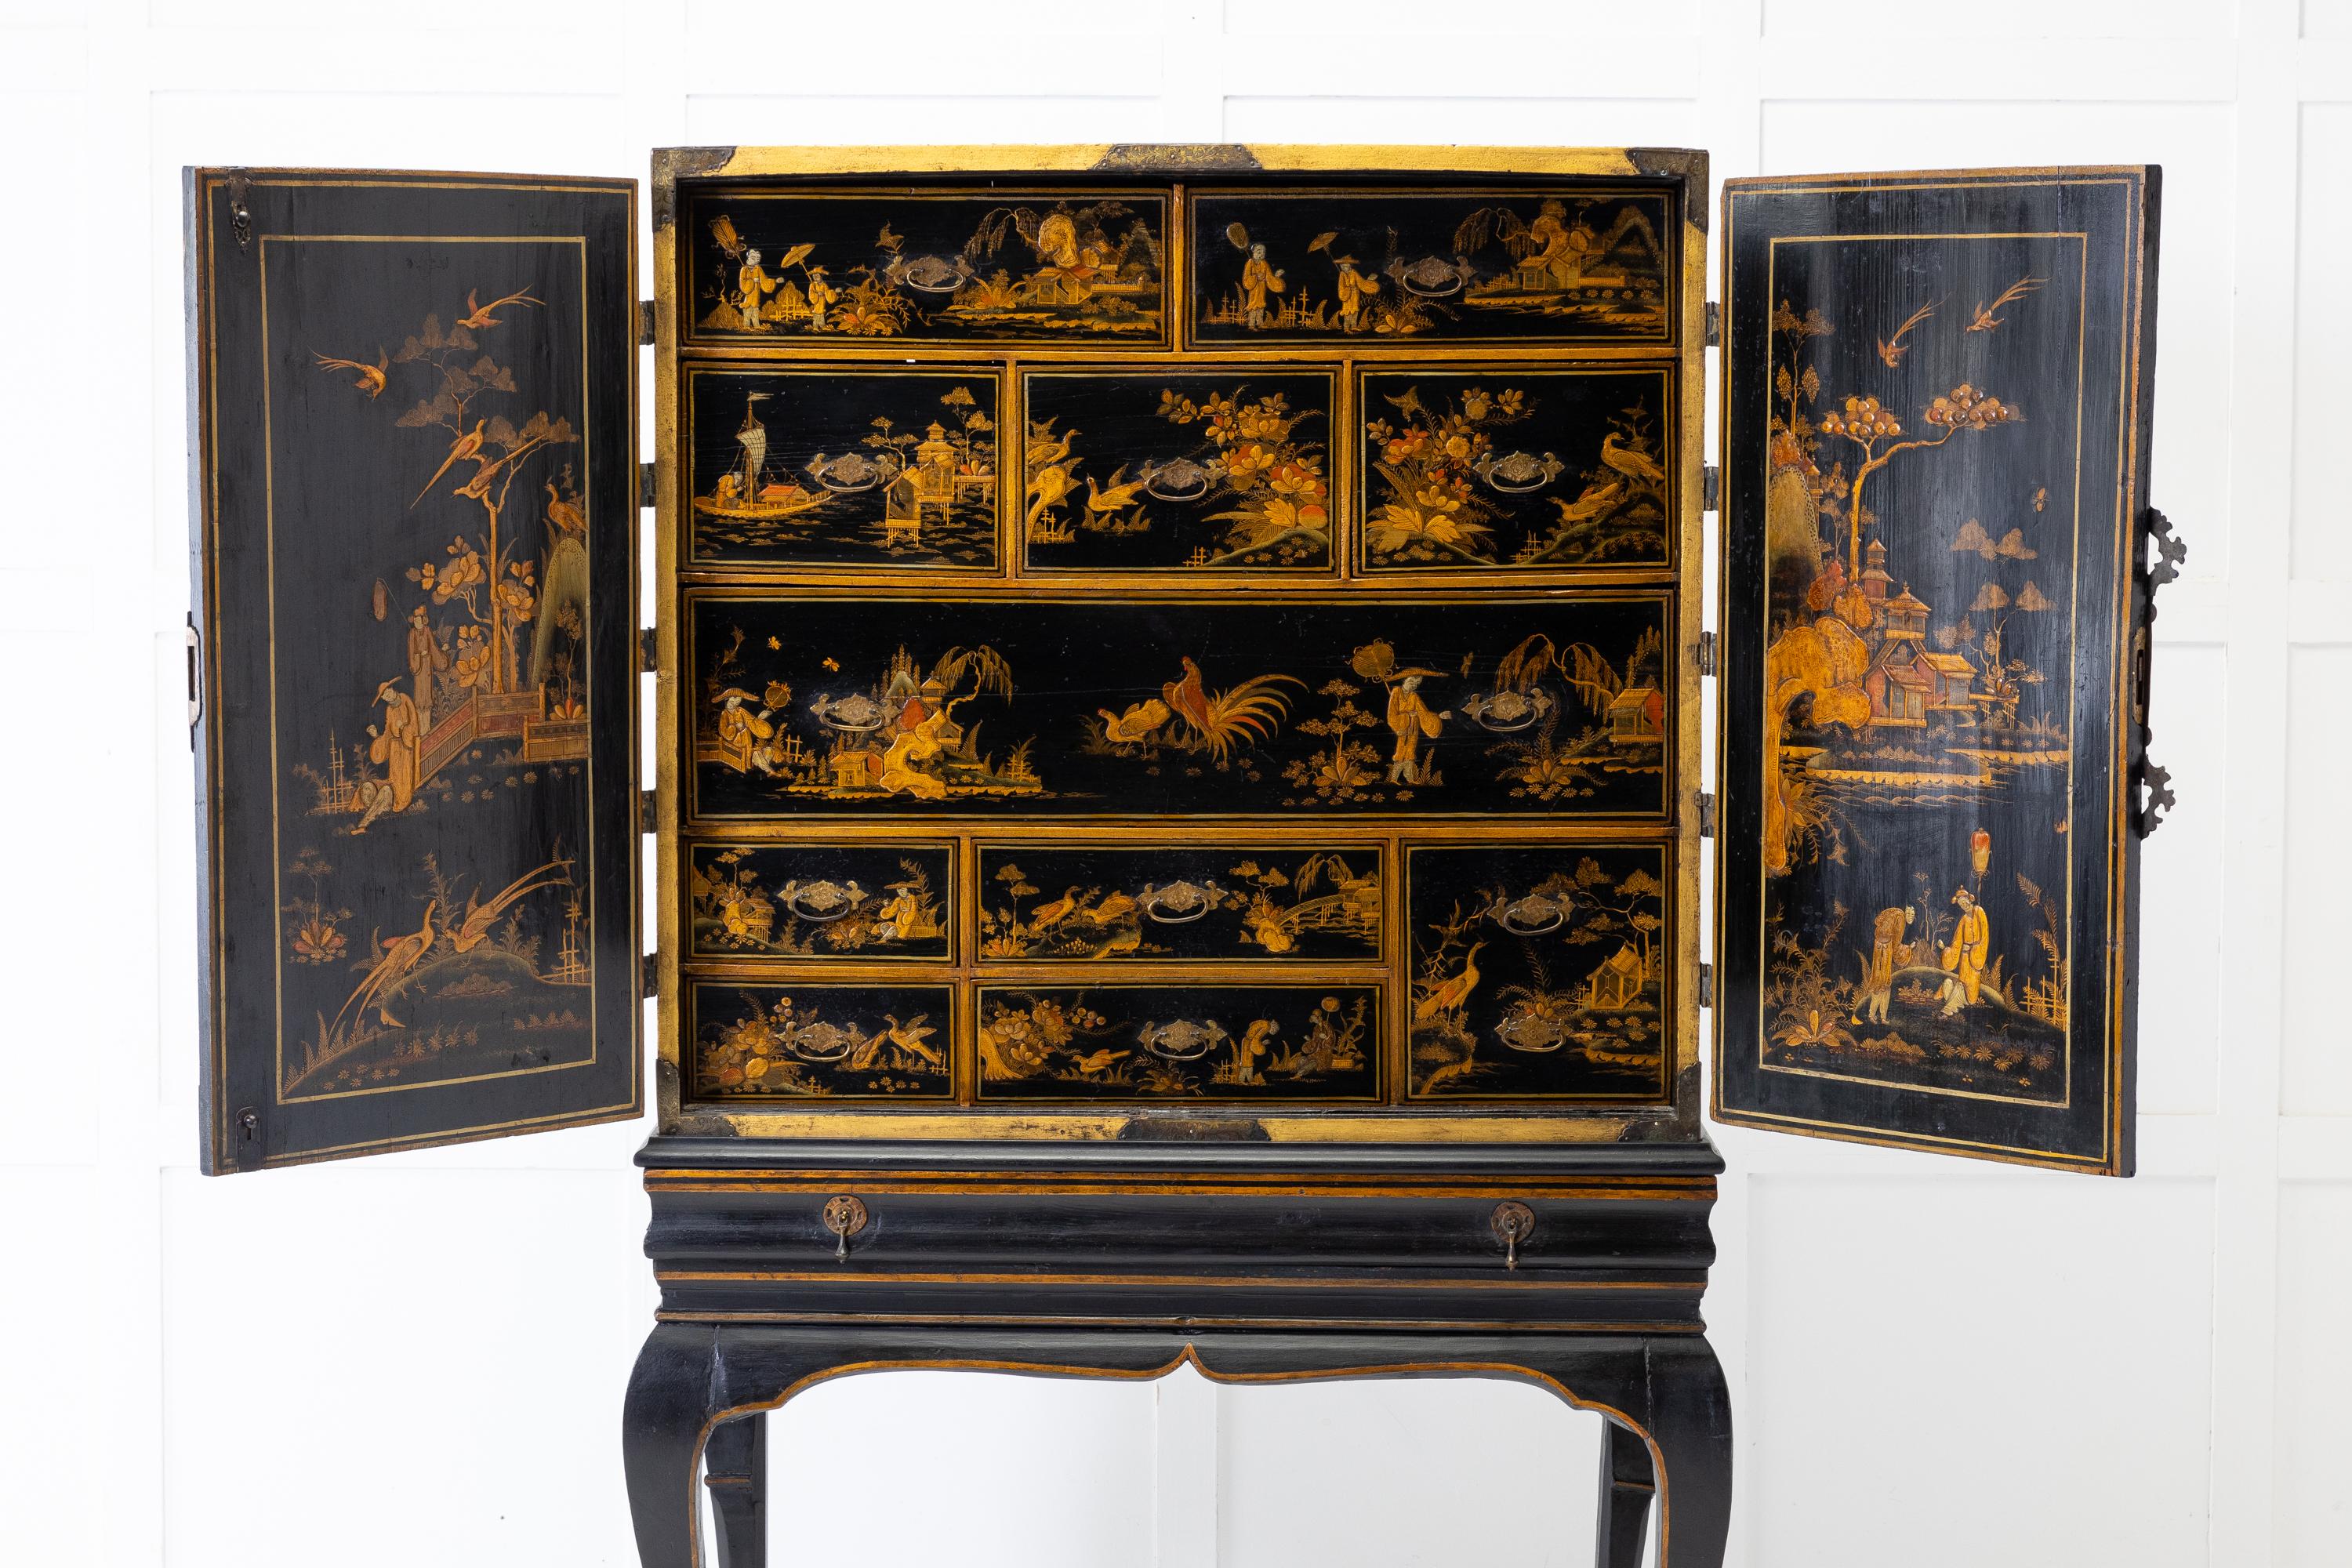 Late 17th Century/early 18th Century black lacquered Chinese Export cabinet on its original stand, which has at one time had careful and sympathetic restoration. Having decoration all over with chinoiserie scenes depicting landscapes and lakes with